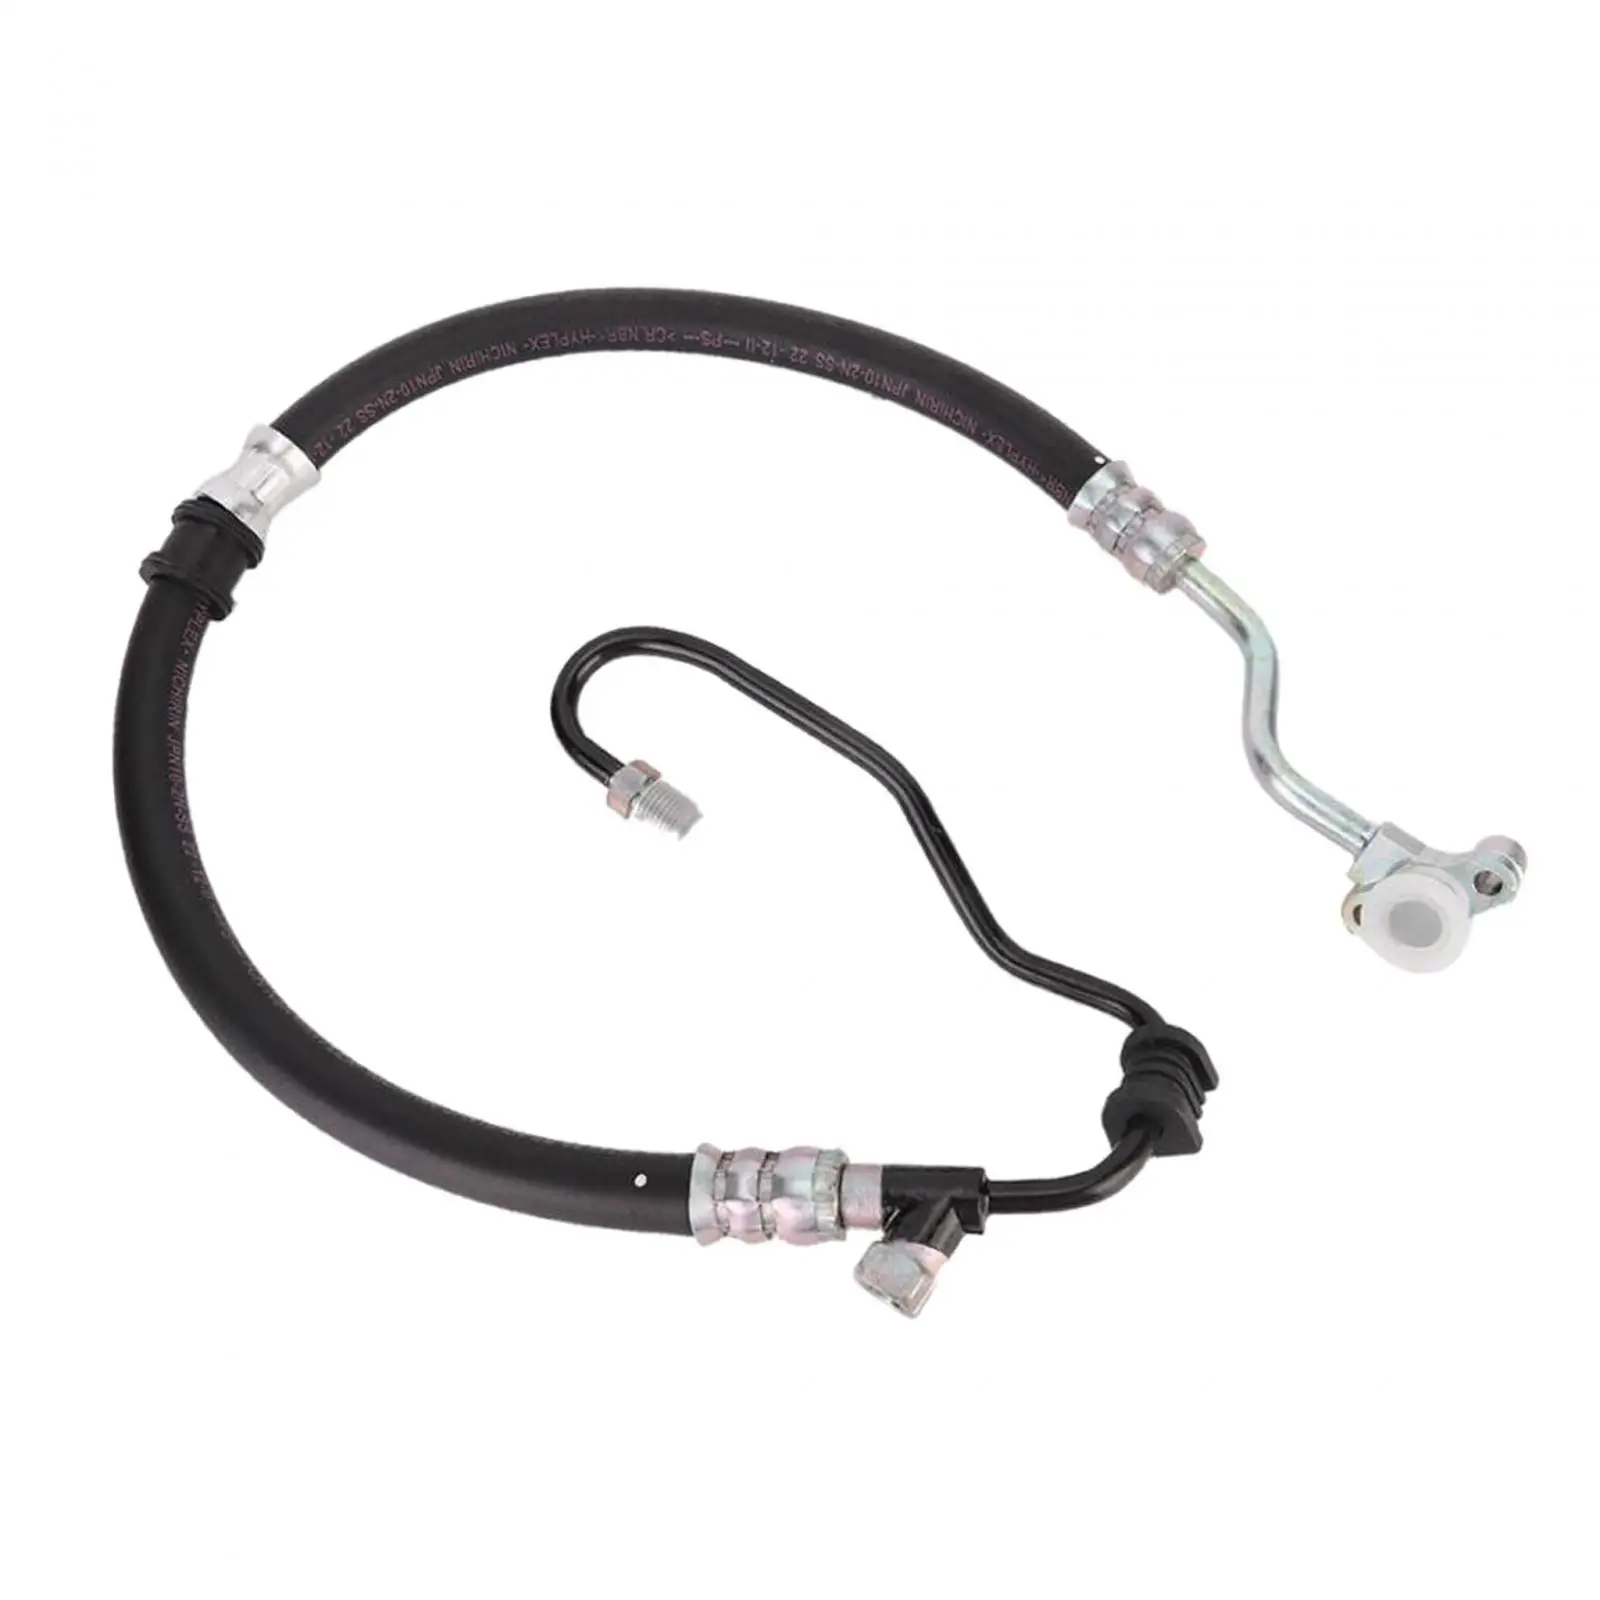 Power Steering Hose 53713-s84-a04 Durable Spare Parts Professional Replacement Accessory for Honda Accord L4 2.3L 1998-2002